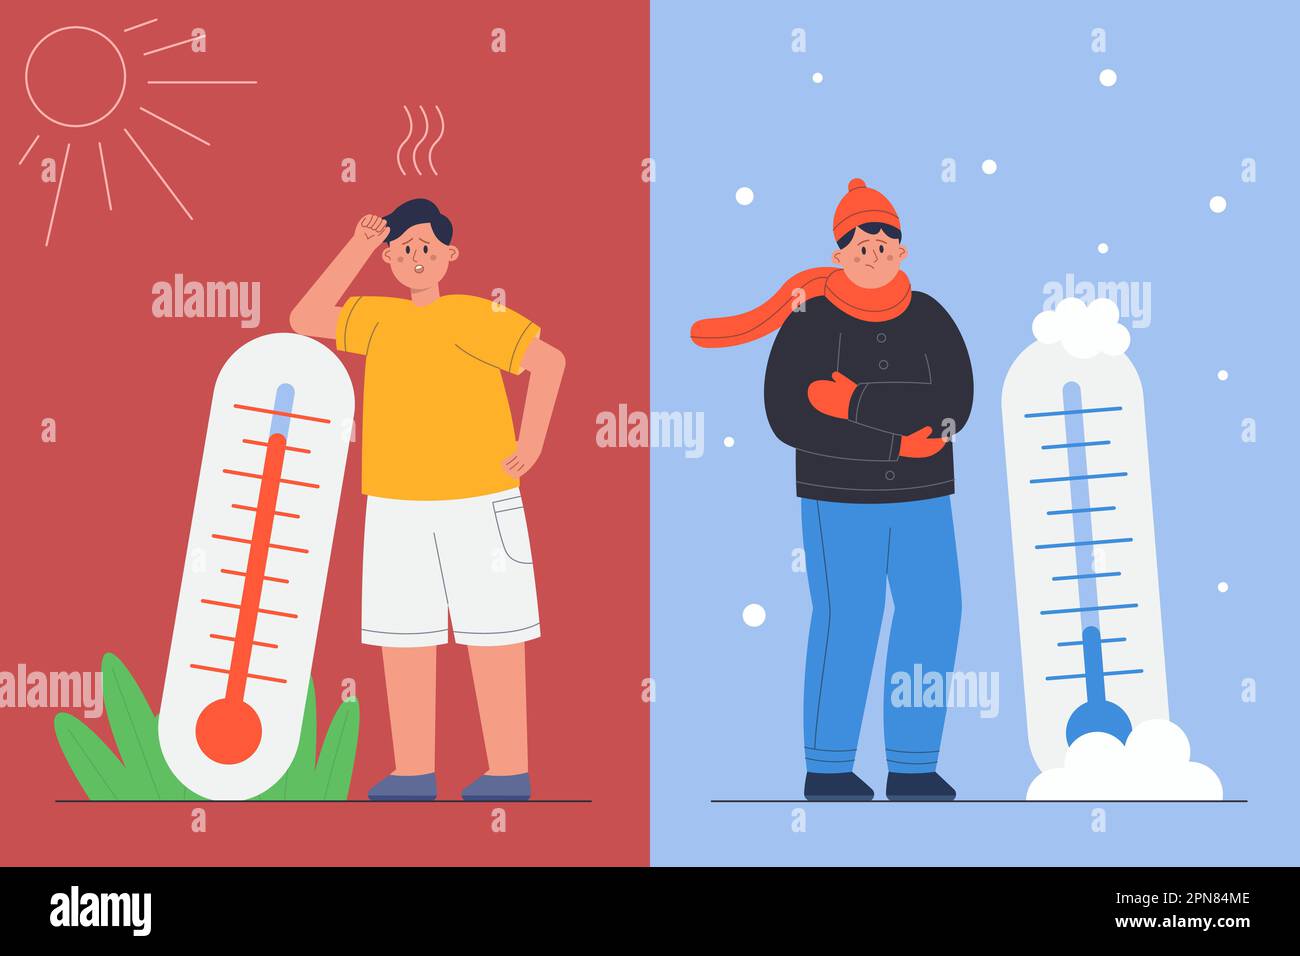 Person with winter cold, summer heat and thermometer Stock Vector